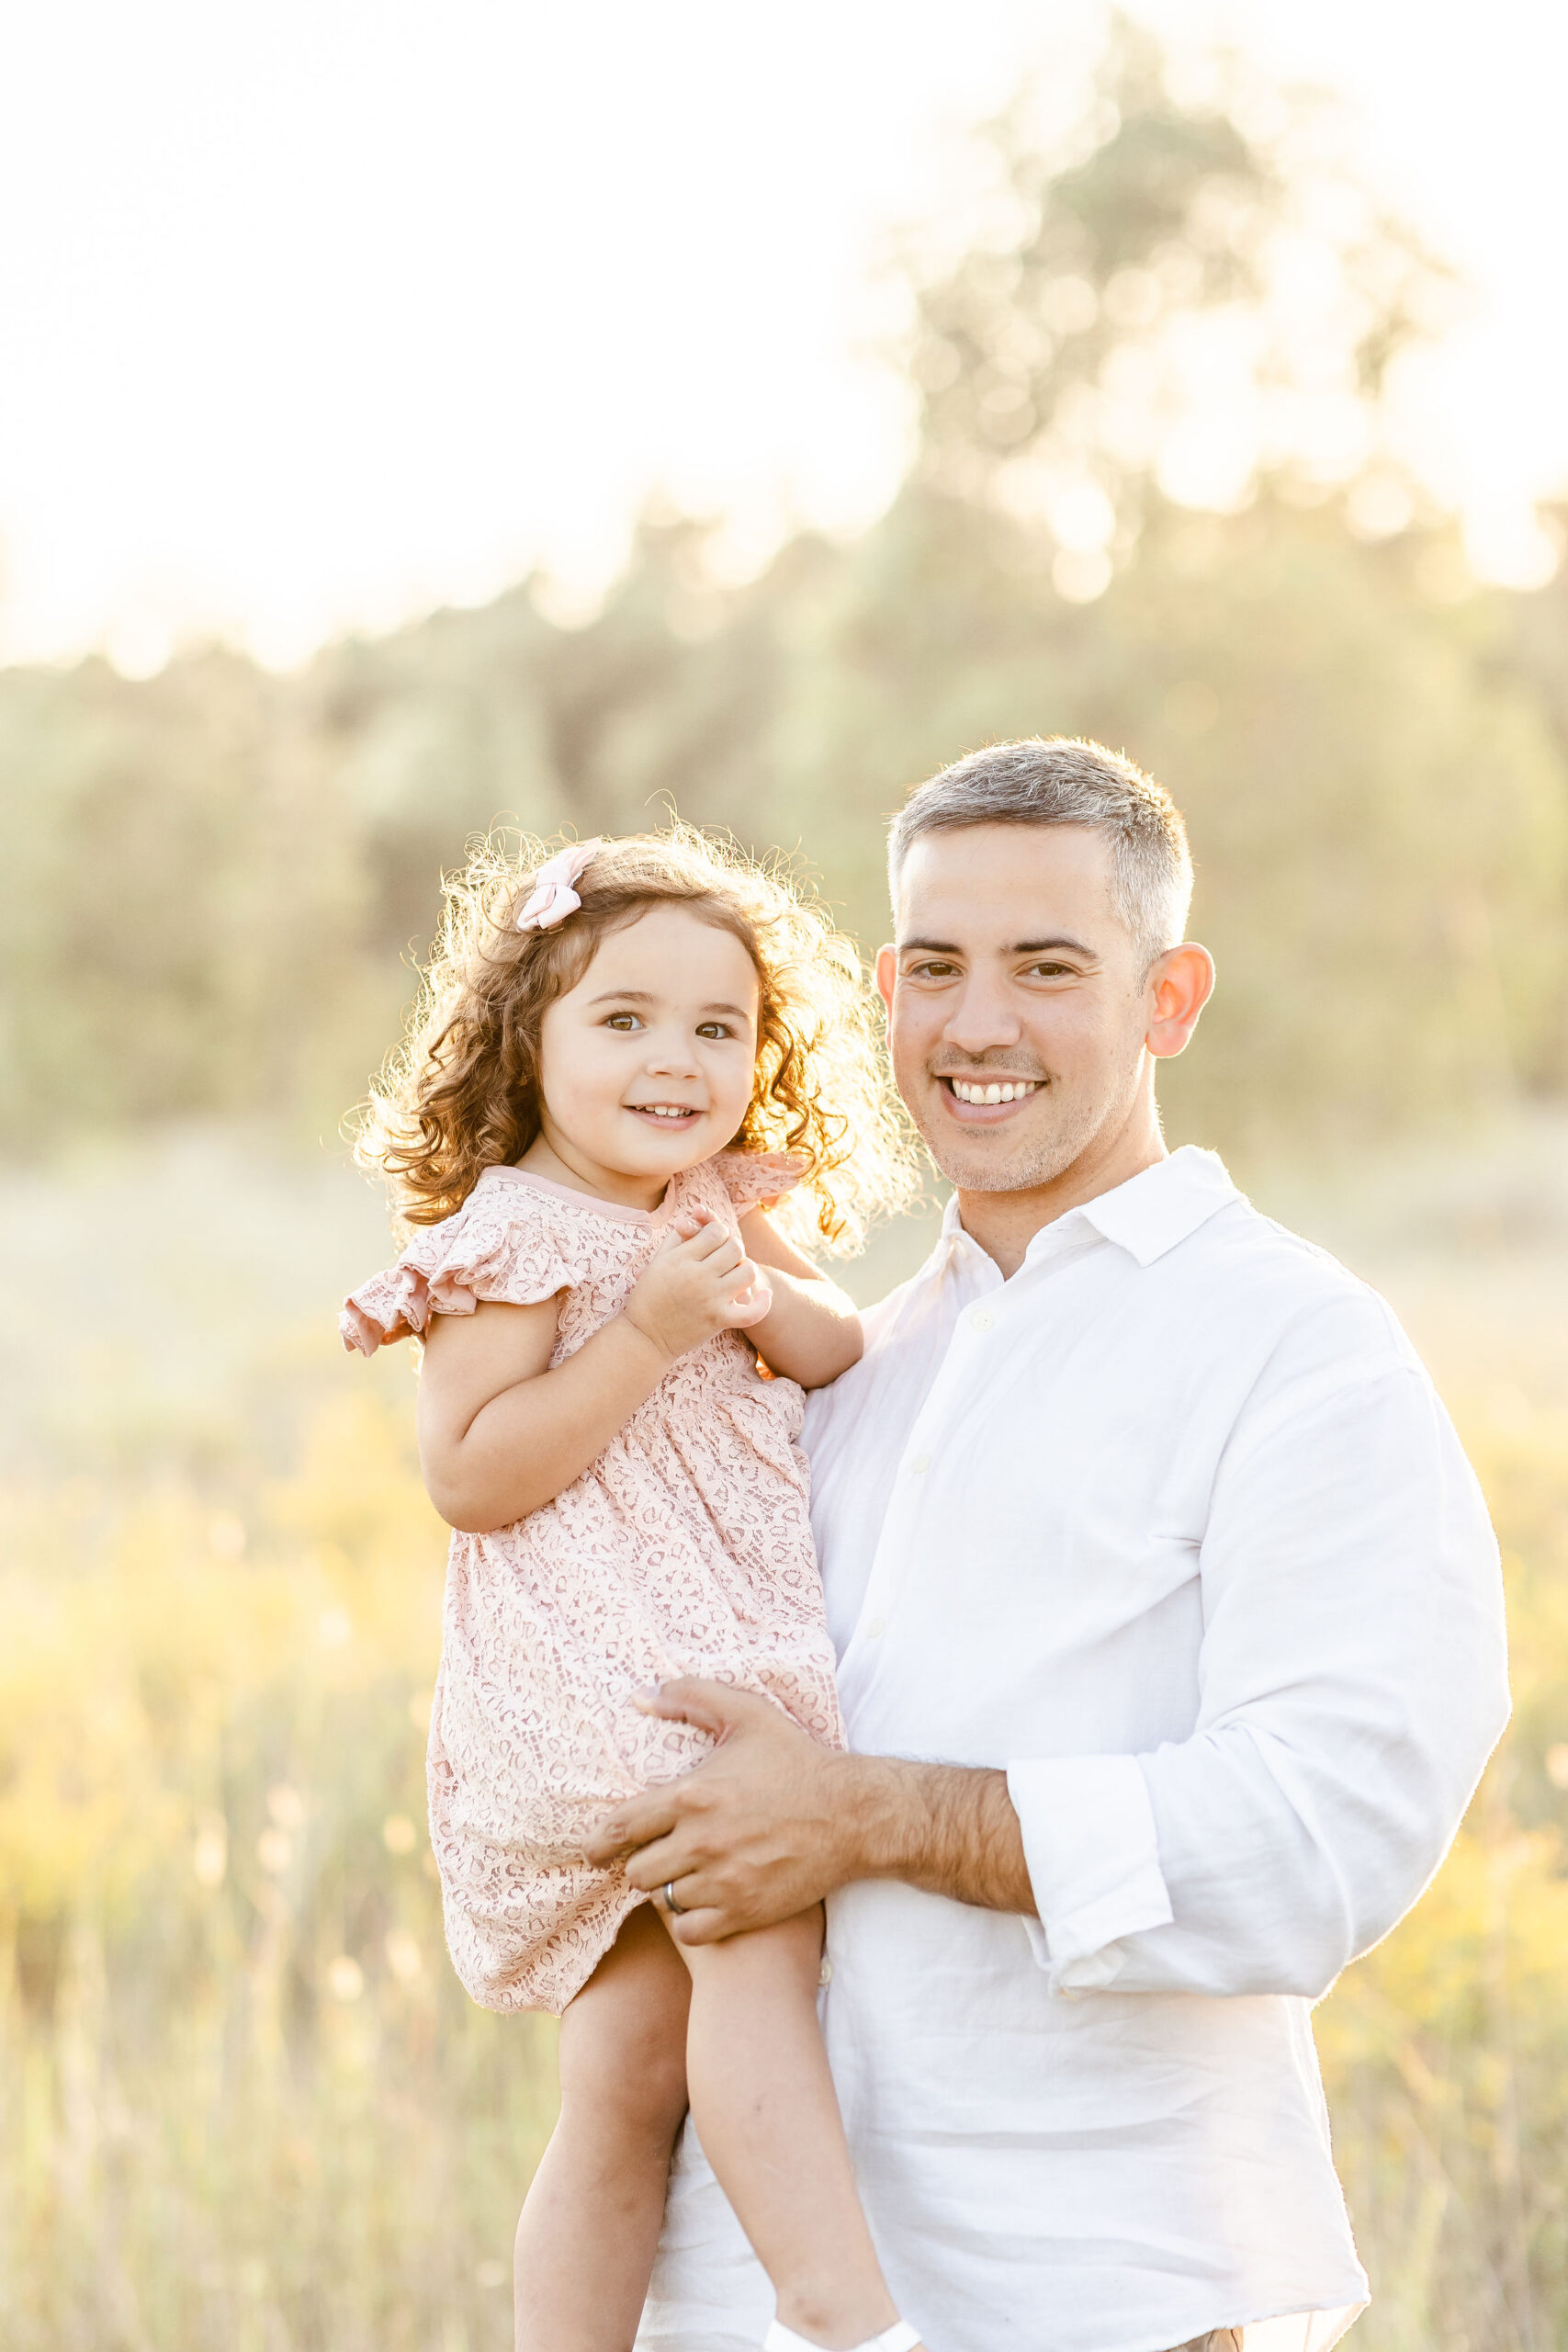 A dad in a white shirt holds his toddler daughter in a pink dress while standing in a bright grassy field at sunset ideal baby and kids